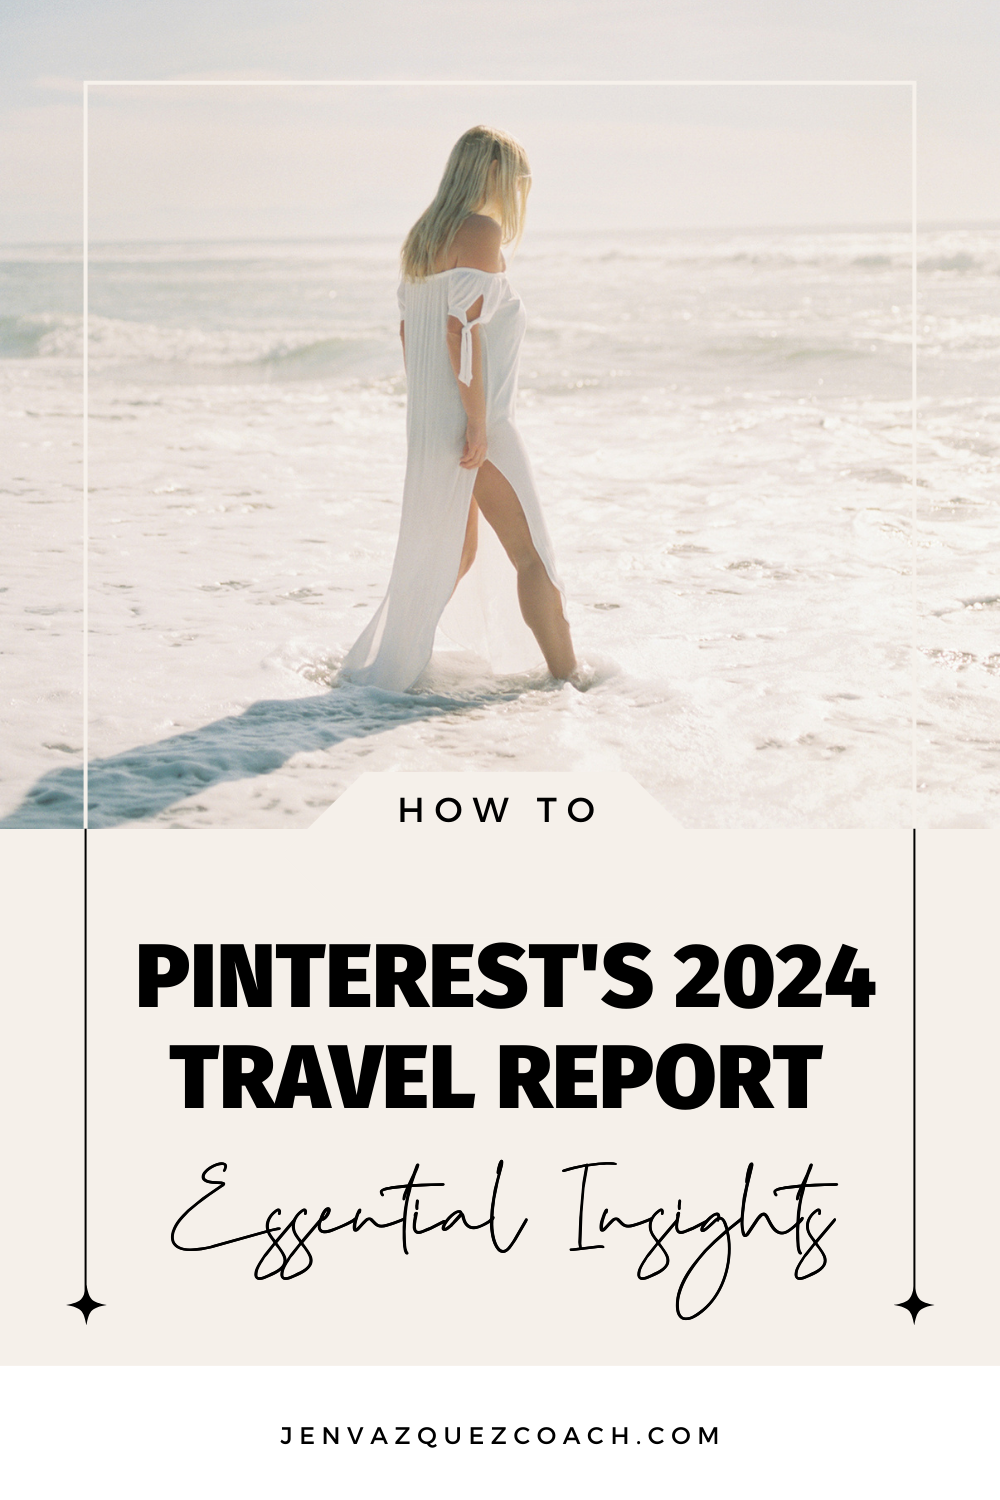 women walking on a beach in a white flowy dress and text 2024 Travel Trends on Pinterest Adventure, Wellness & More